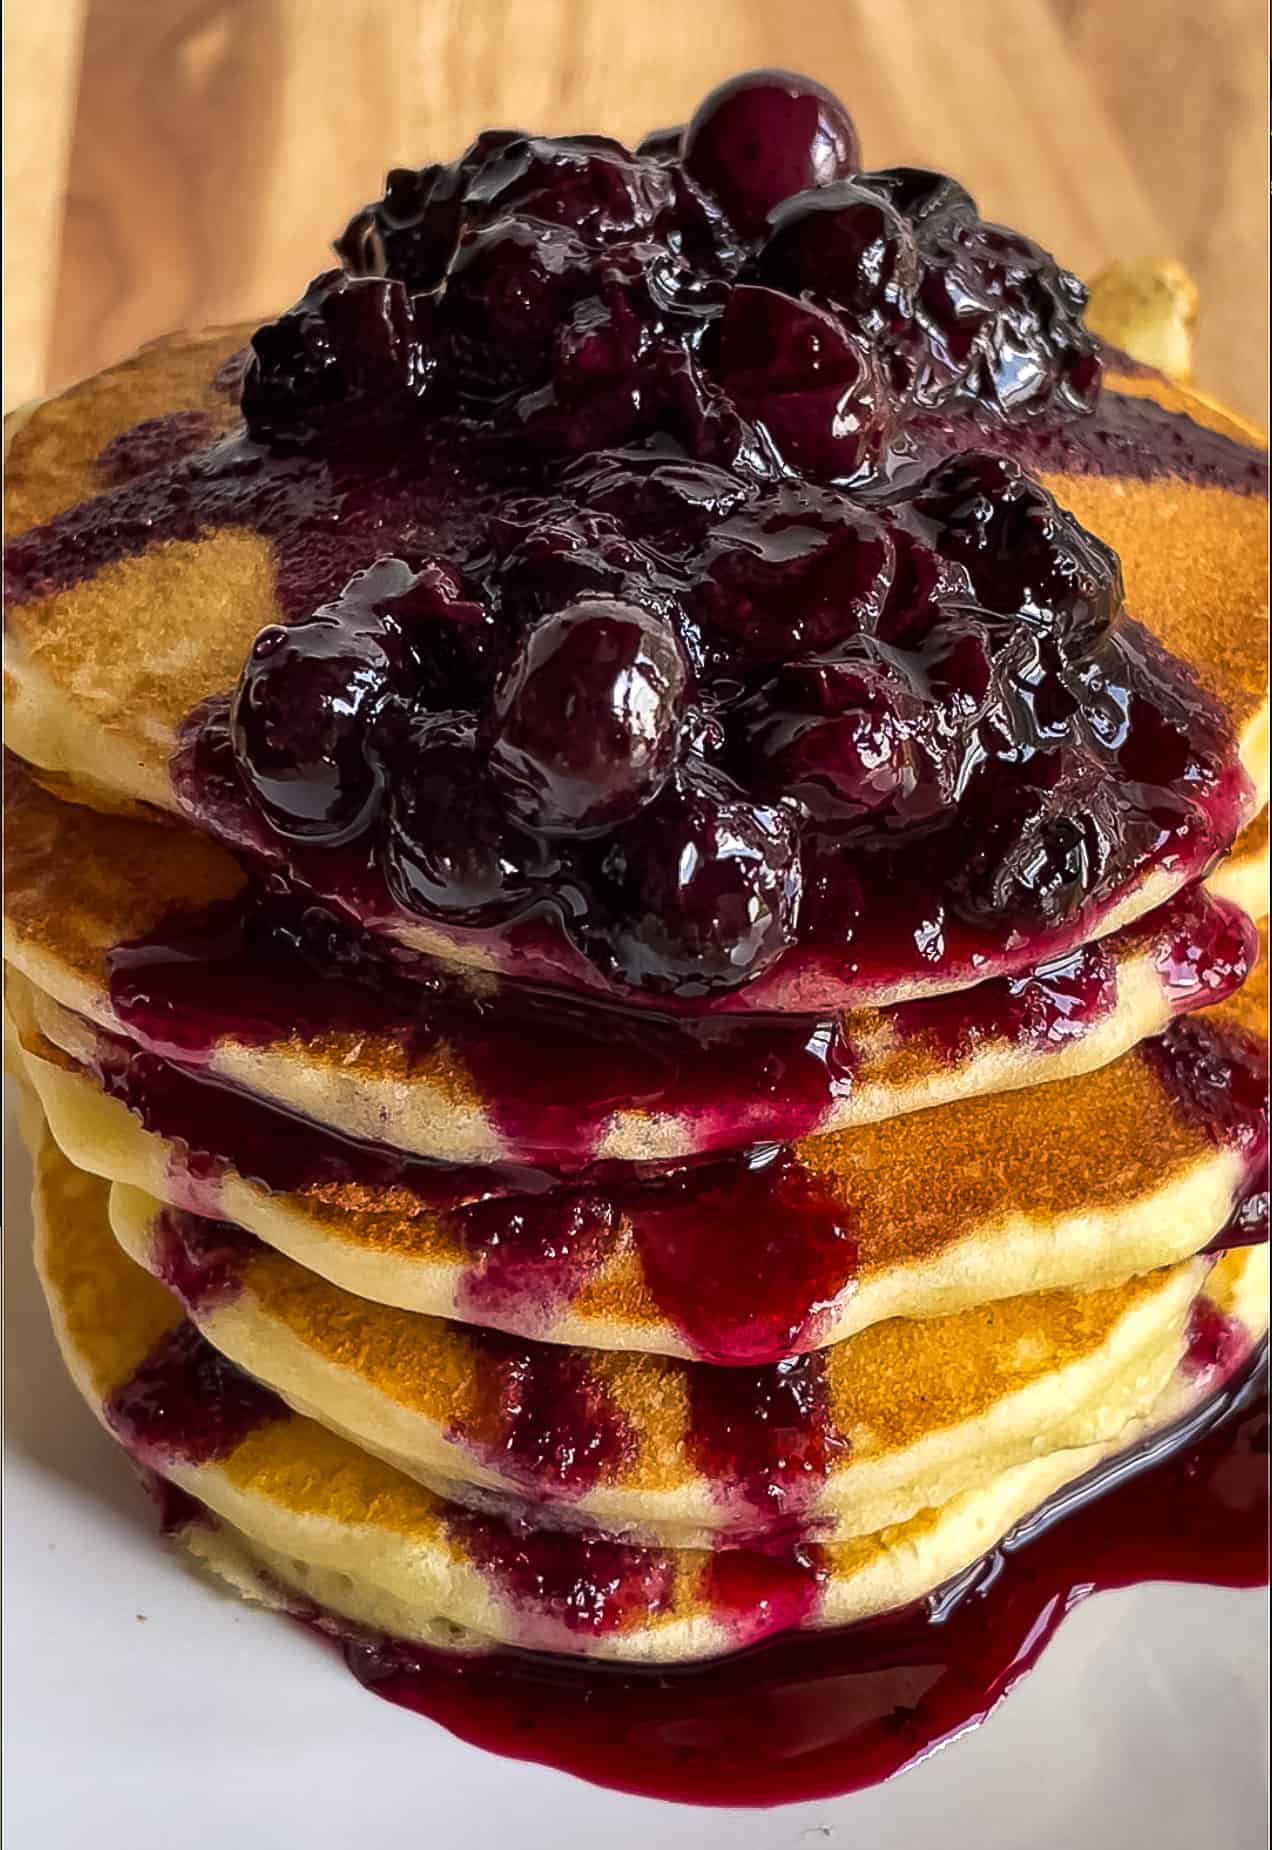 Blueberry maple syrup on a stack of pancakes.